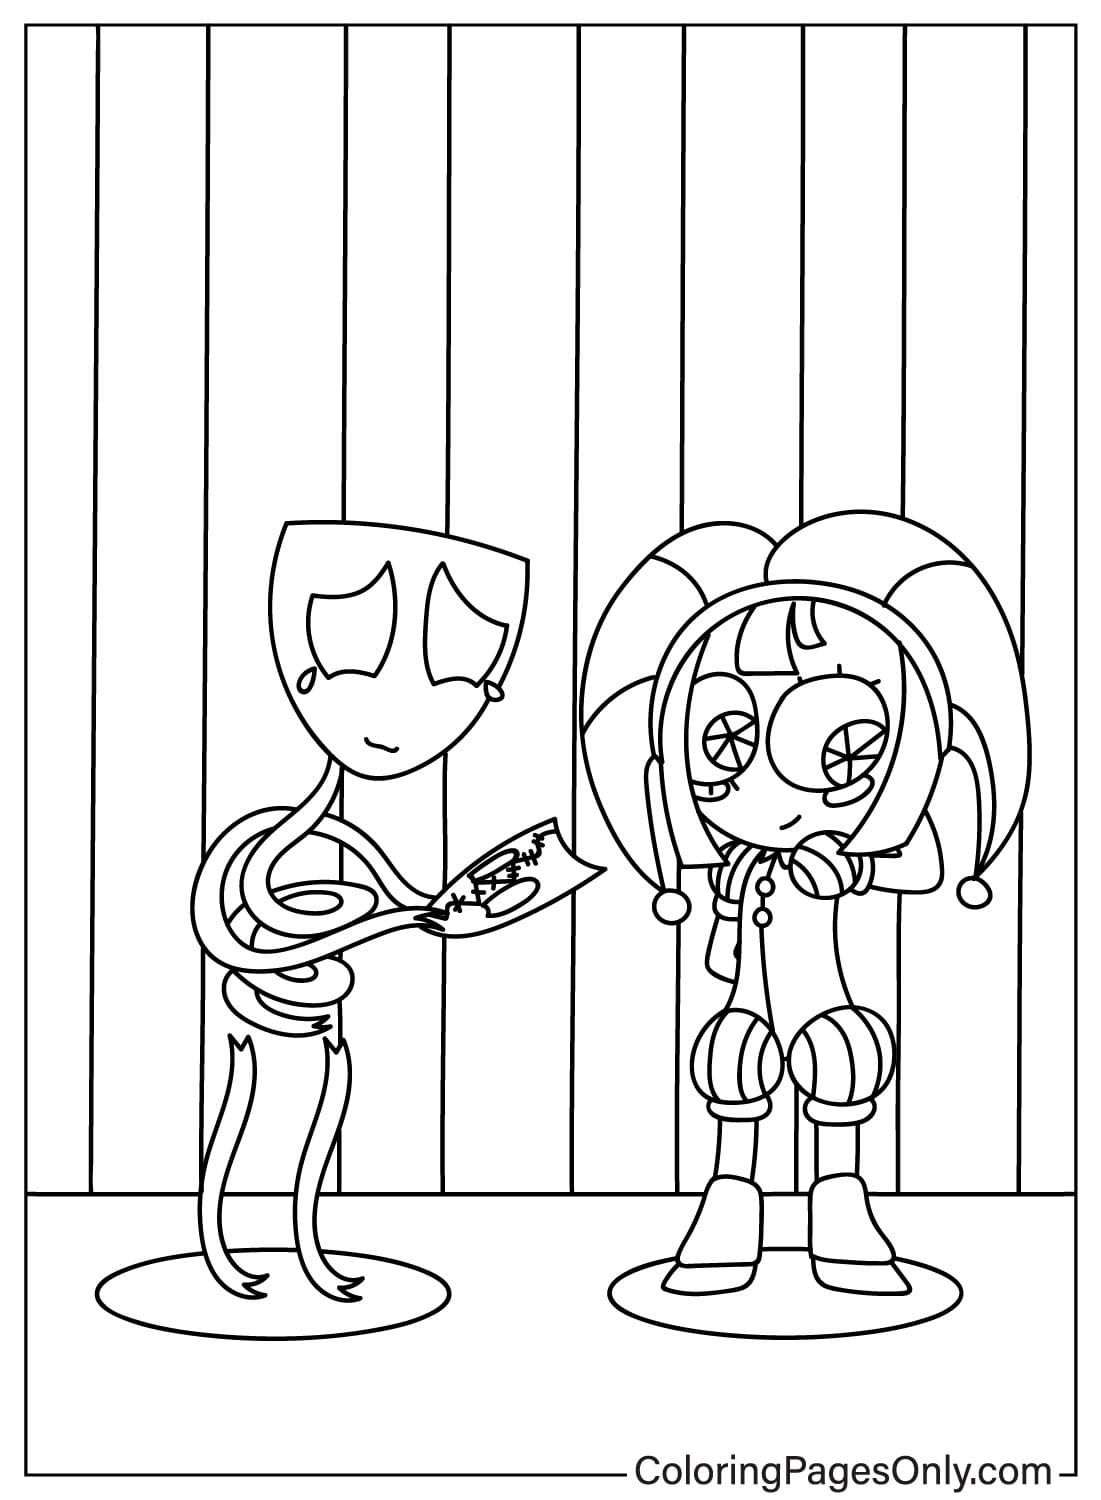 Gangle and Pomni Free Coloring Page from Pomni